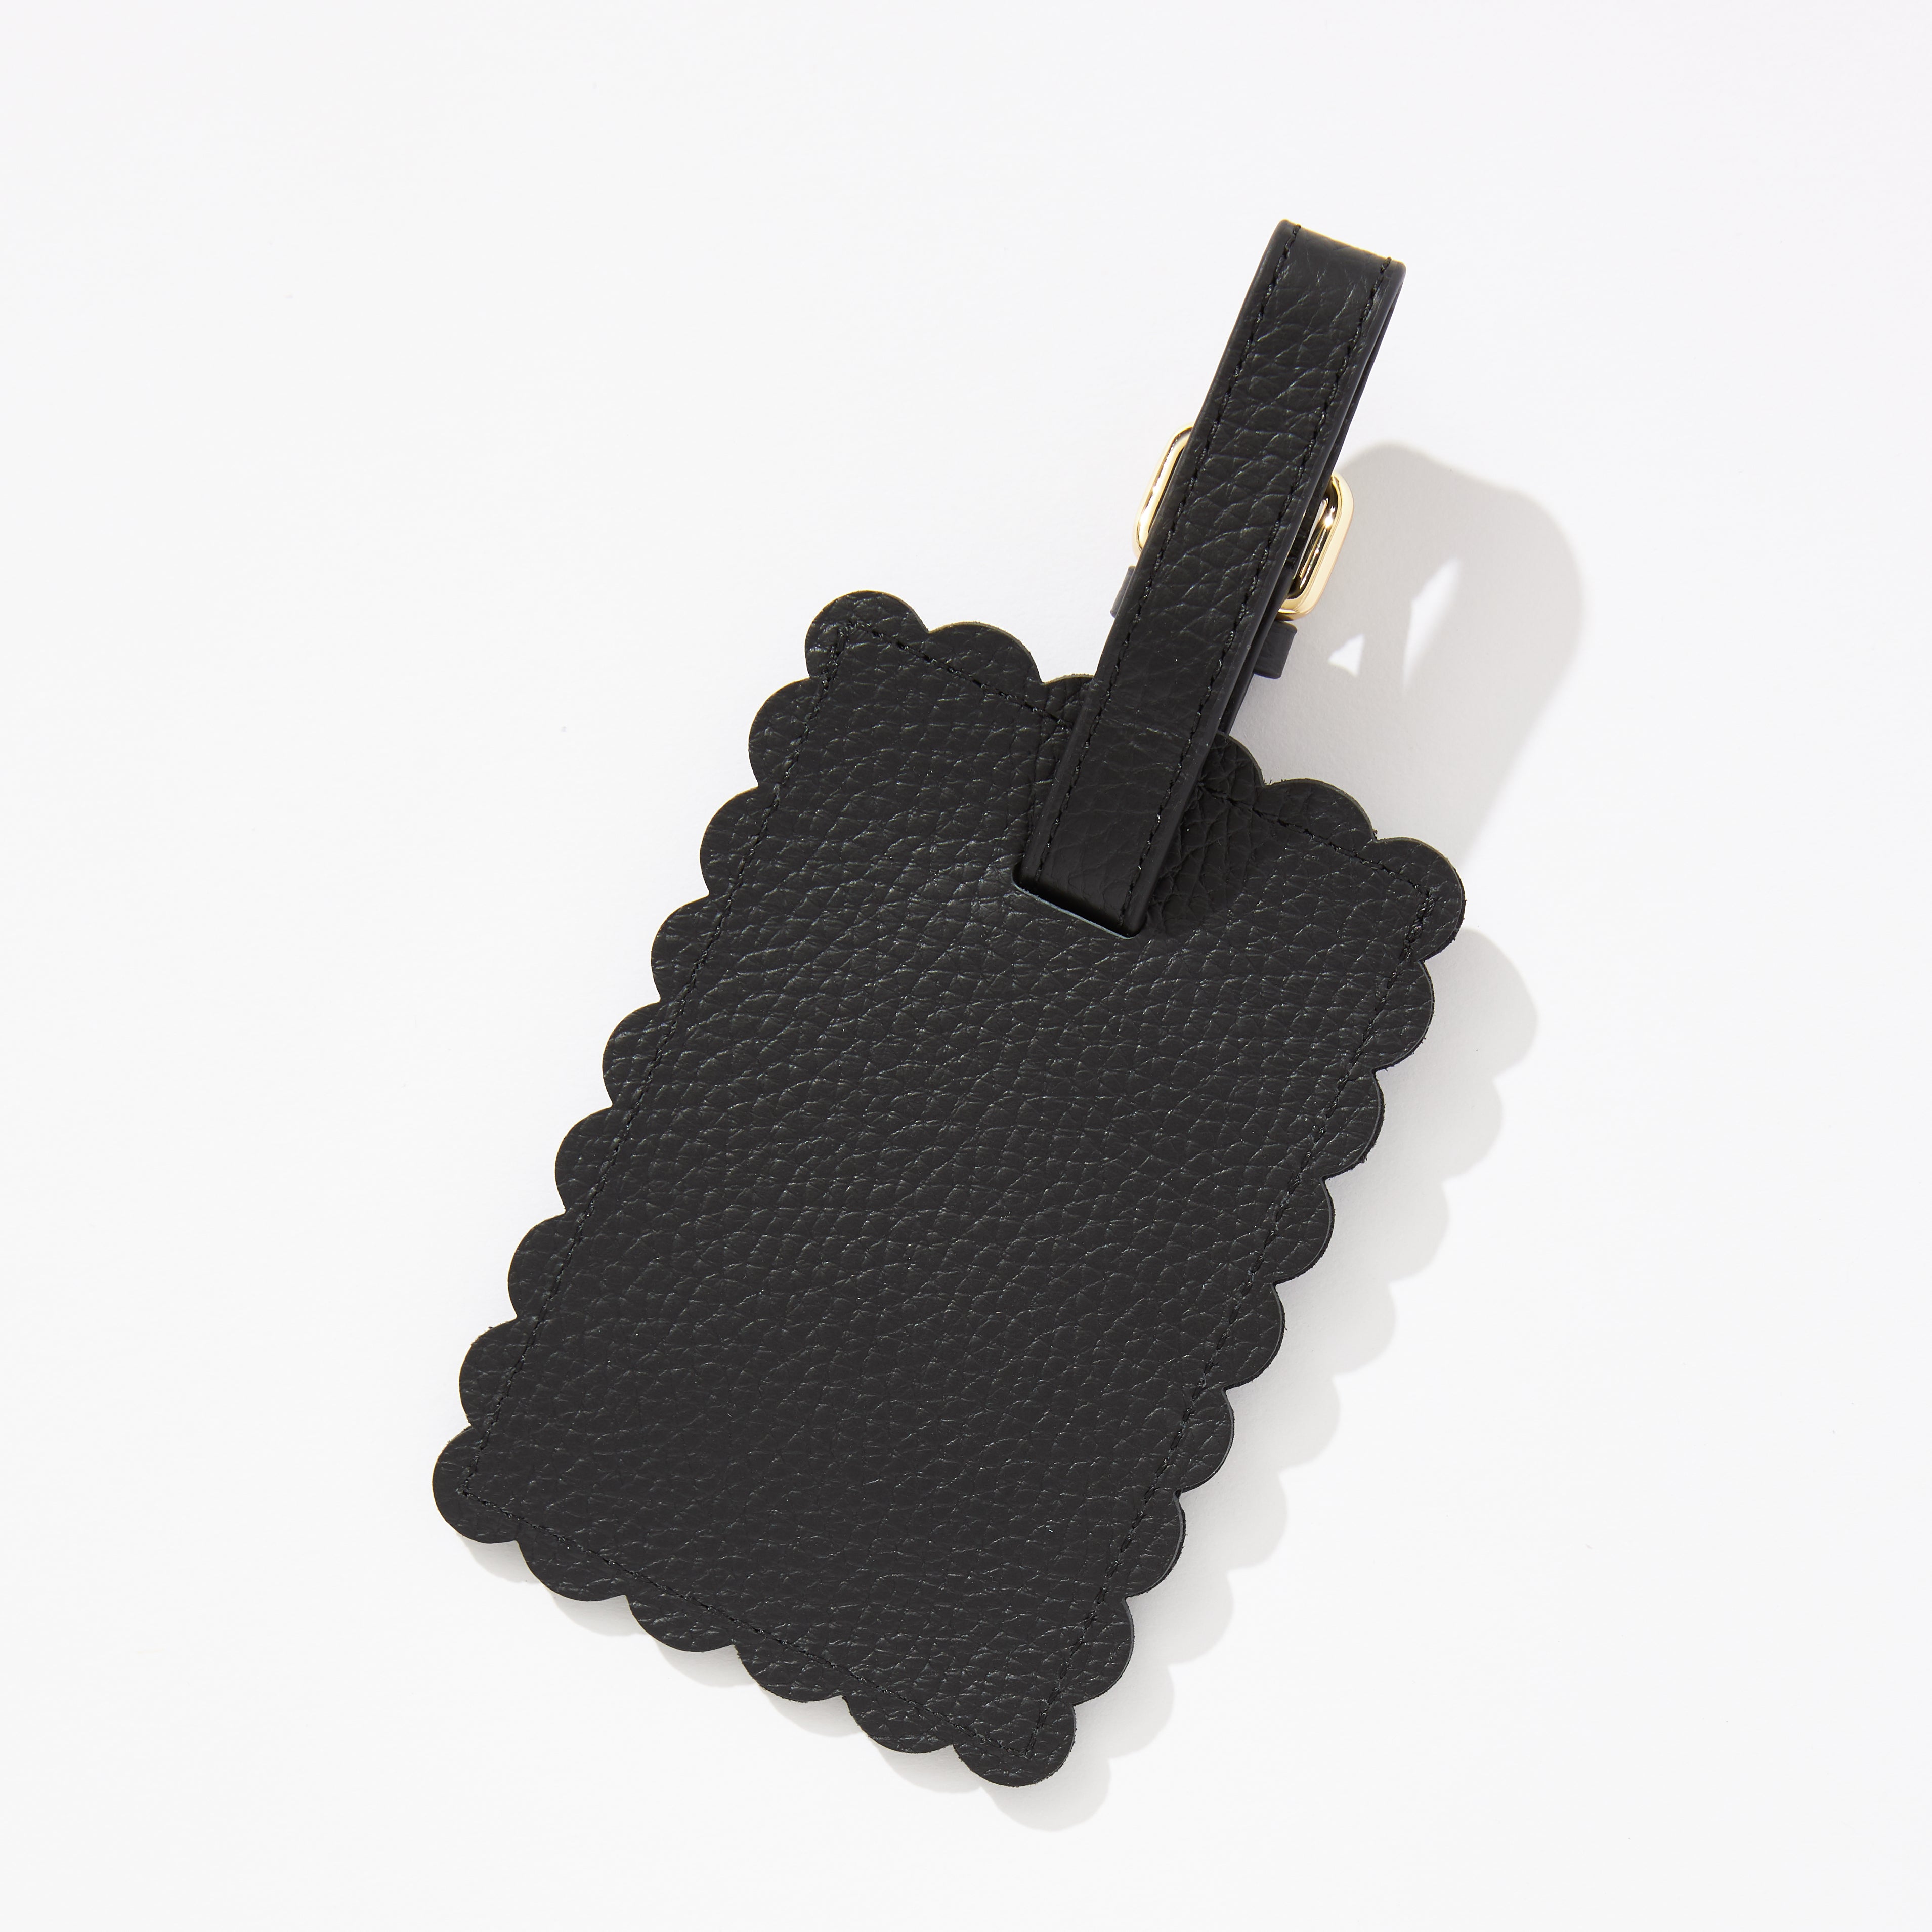 Away on X: Then: one black luggage tag Now: The Luggage Tag in nine new  colors for a suitcase that's unmistakably yours. Shop it now and get Away  in (even more) color.